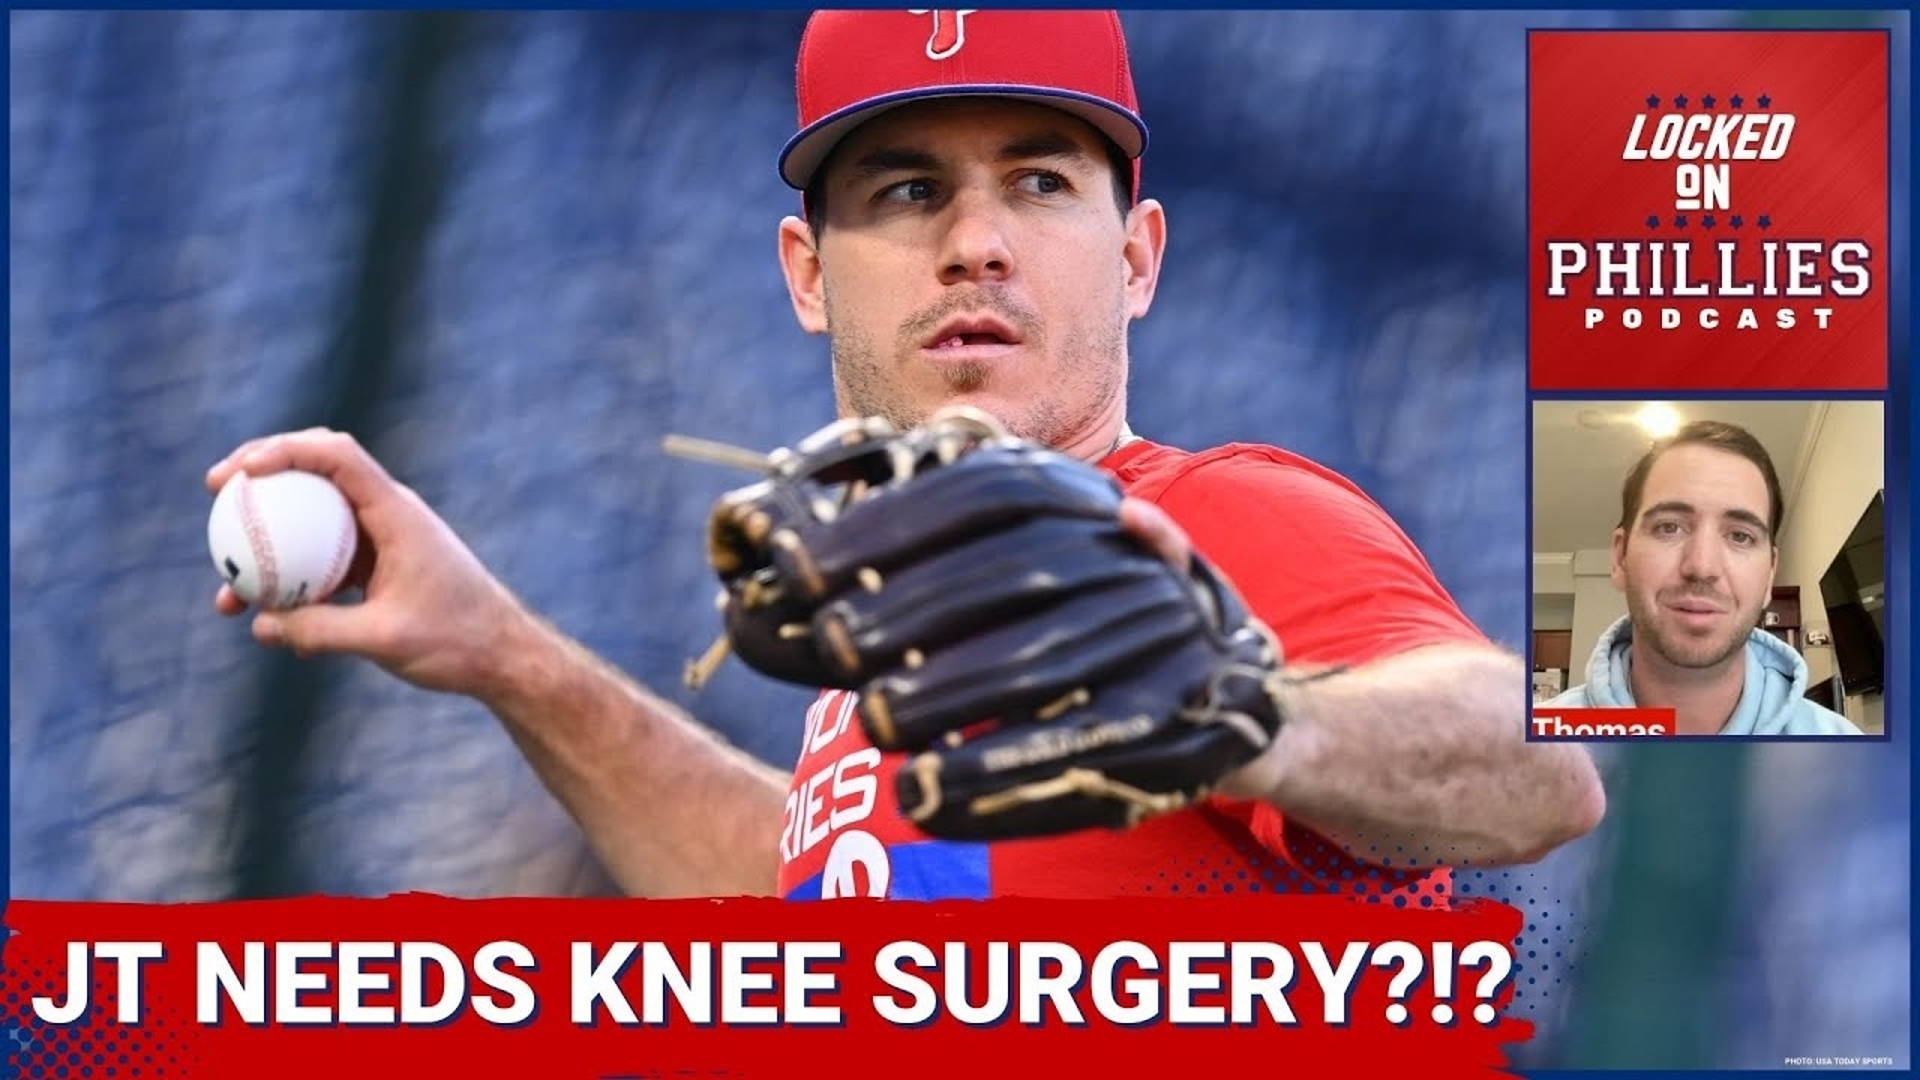 In today's episode, Connor reacts to the shocking news of Philadelphia Phillies catcher JT Realmuto needing knee surgery, and breaks down the details of the injury.